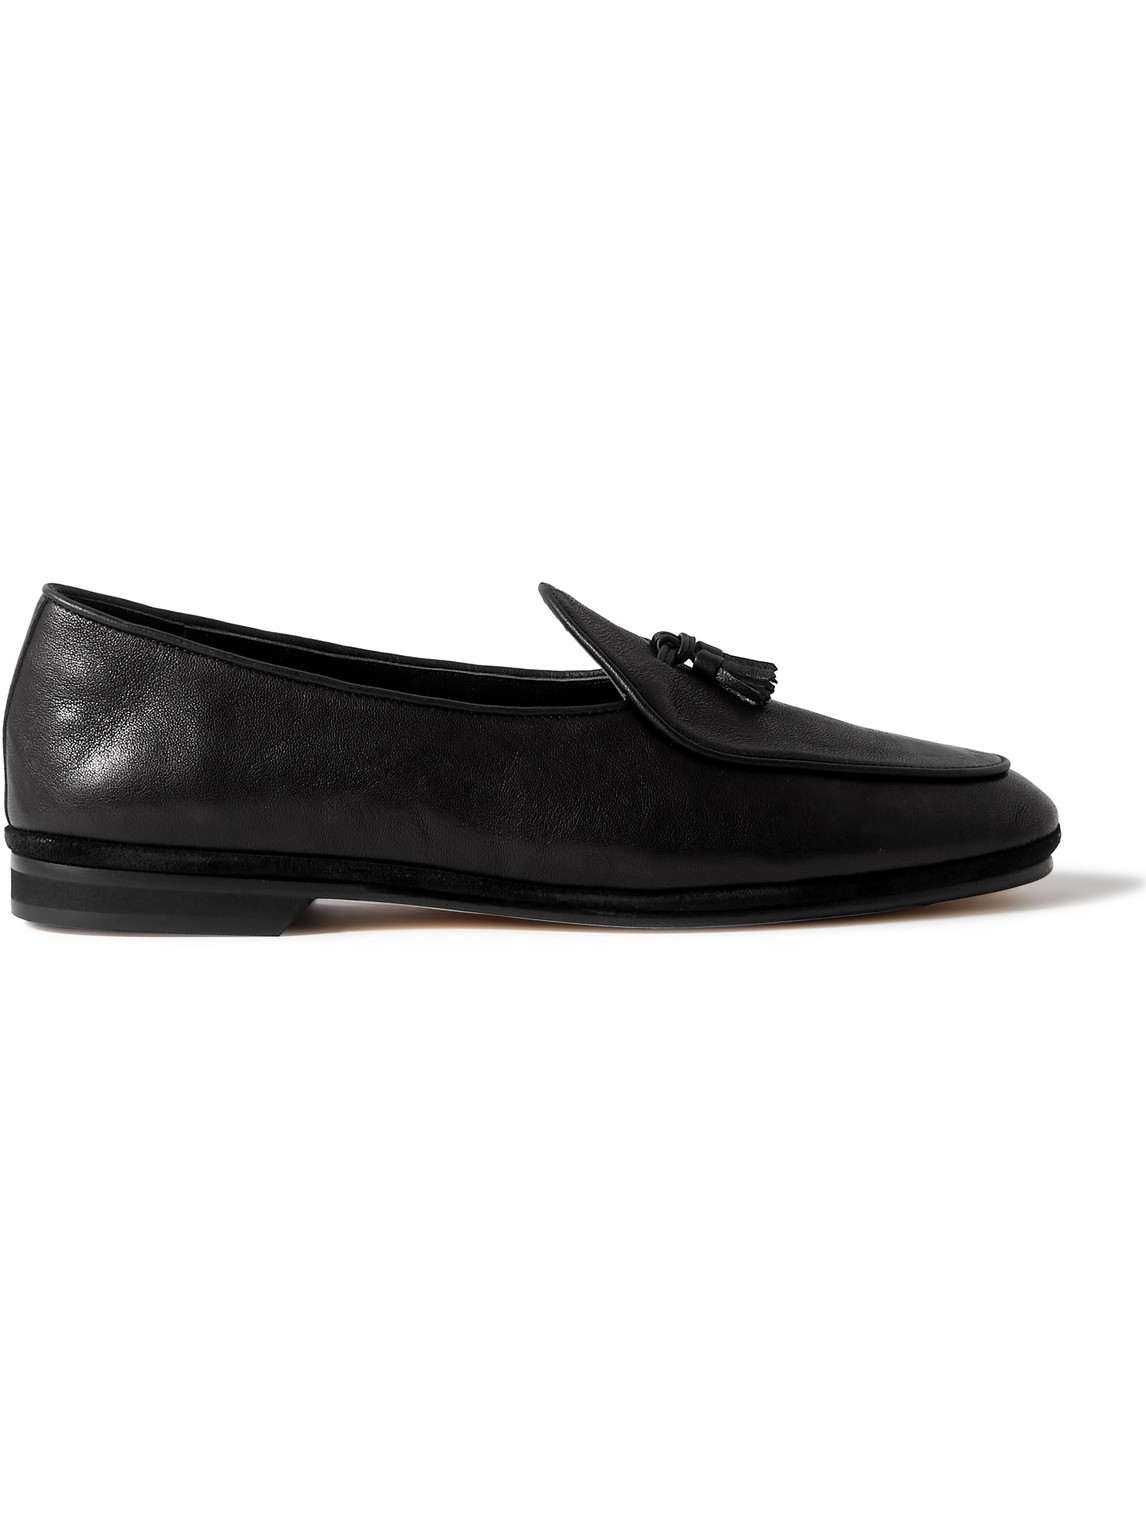 Marphy Tasselled Leather Loafers